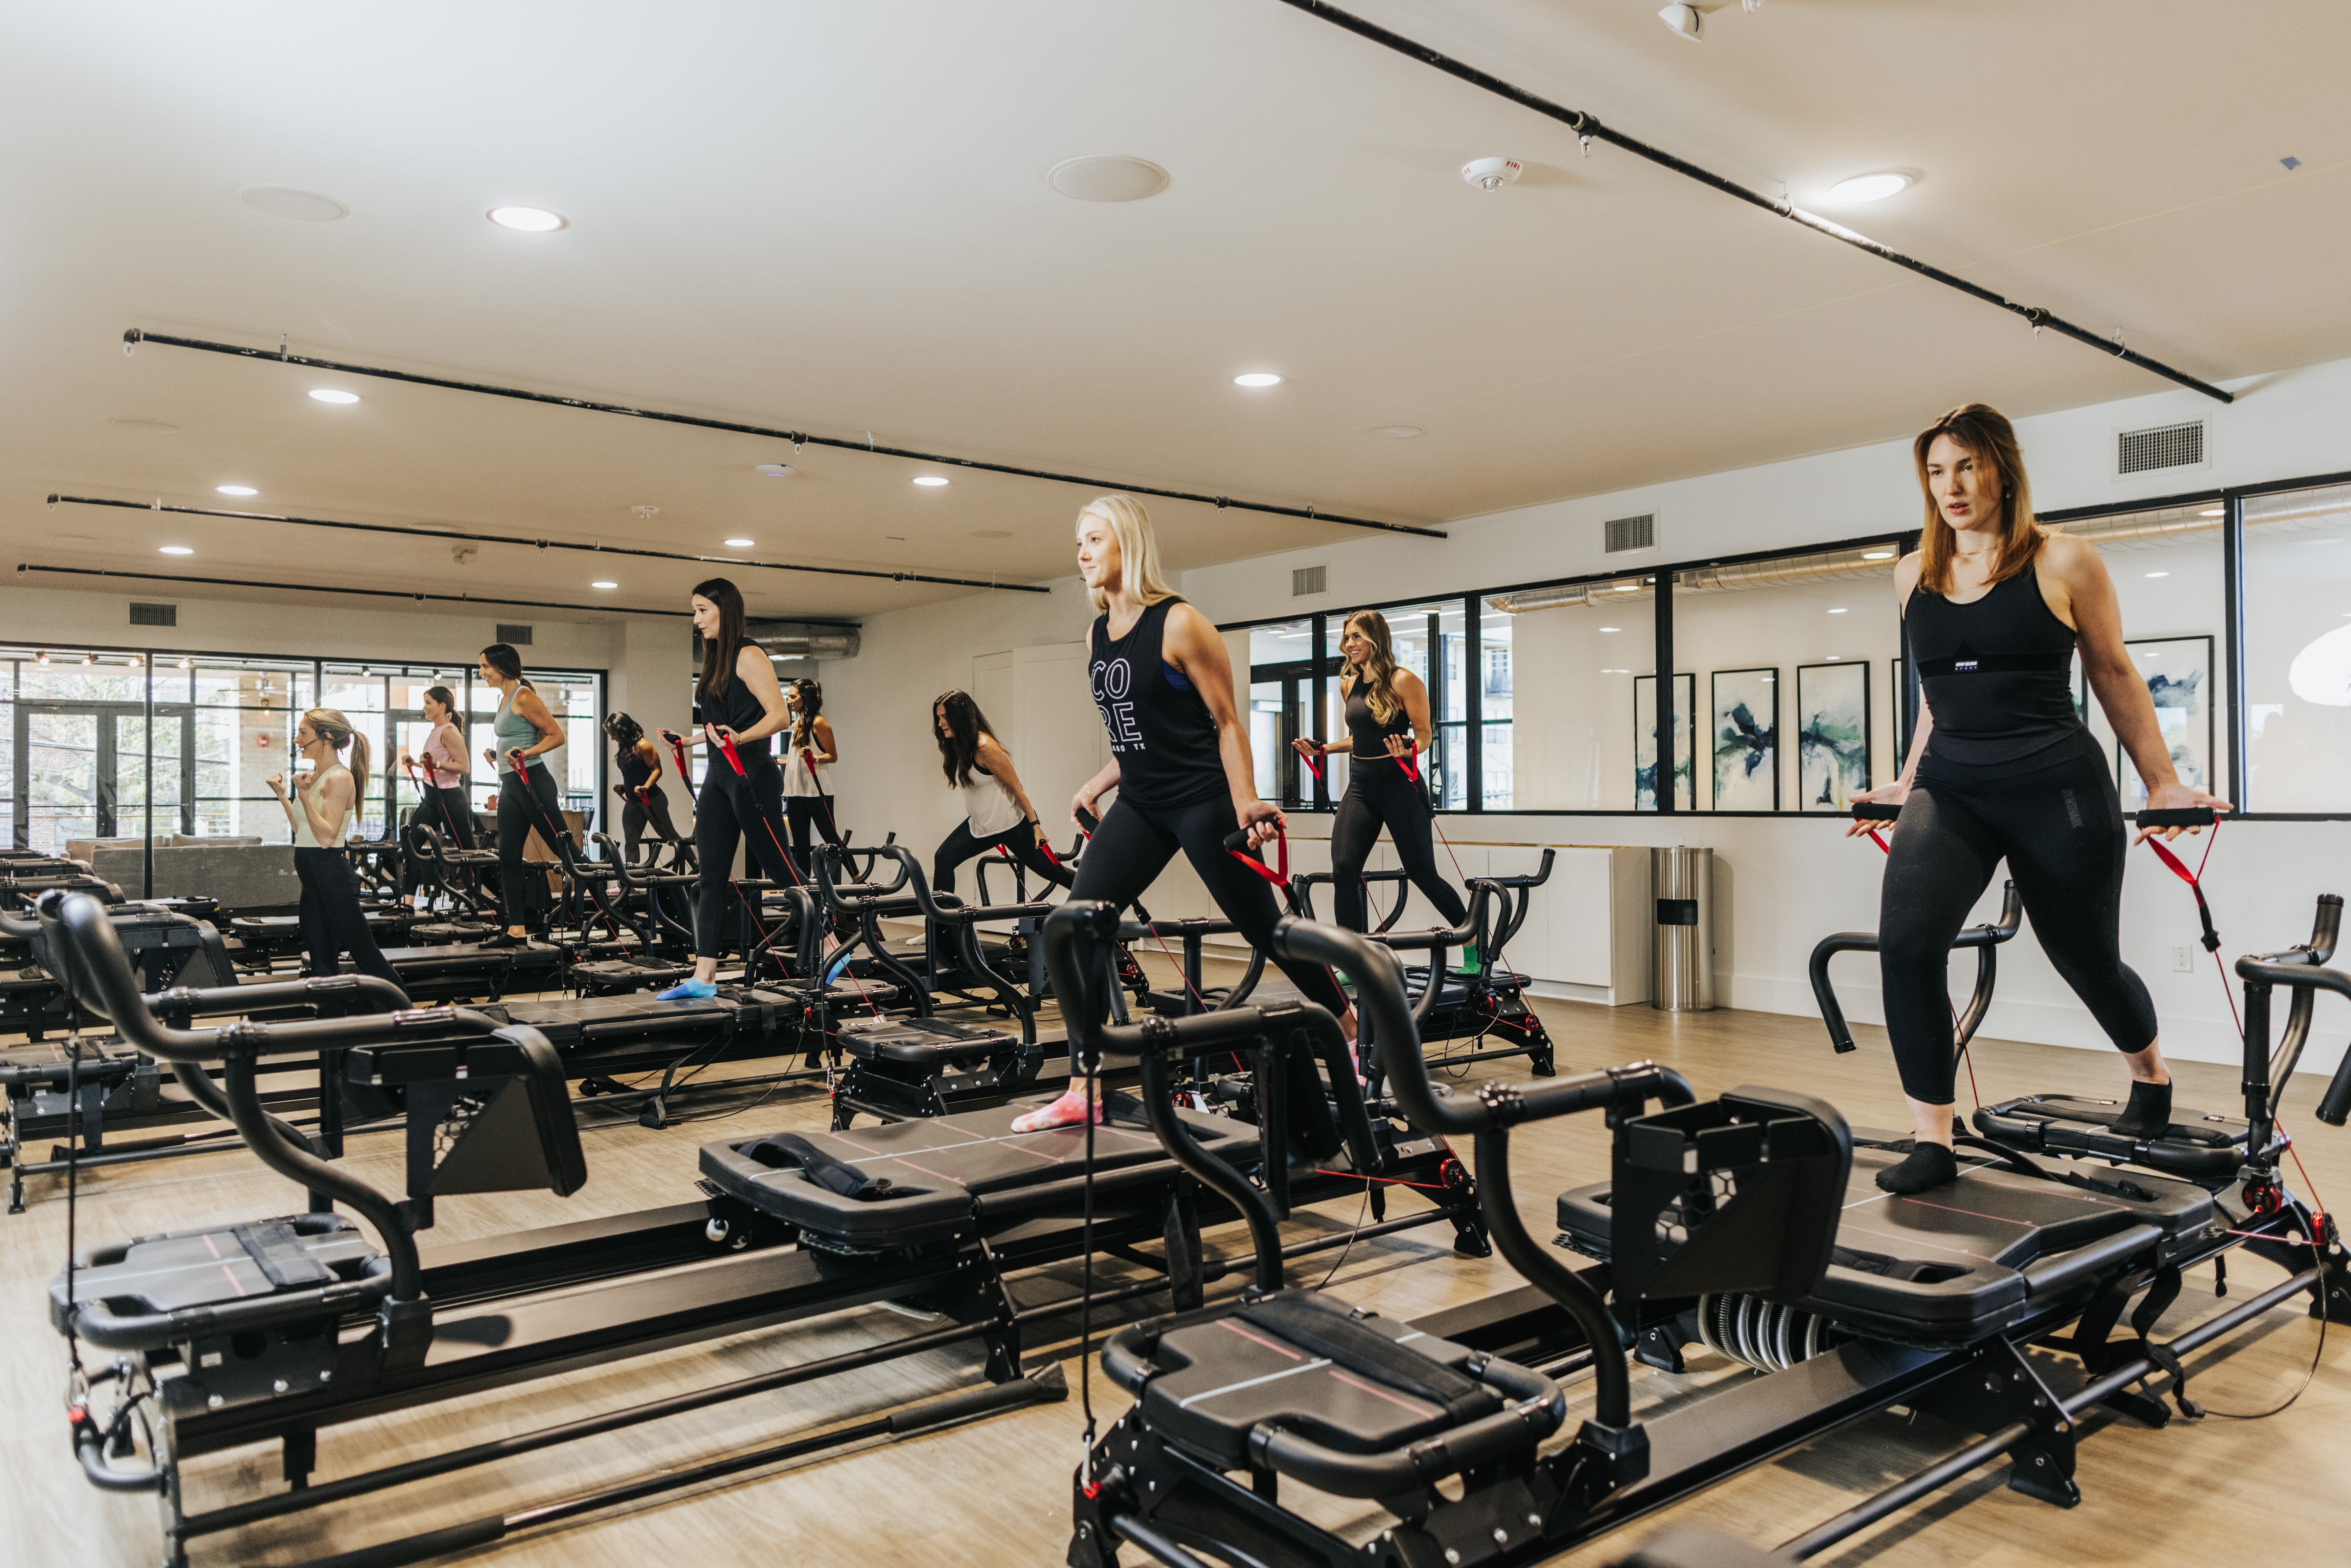 Urban Core Lagree: Read Reviews and Book Classes on ClassPass